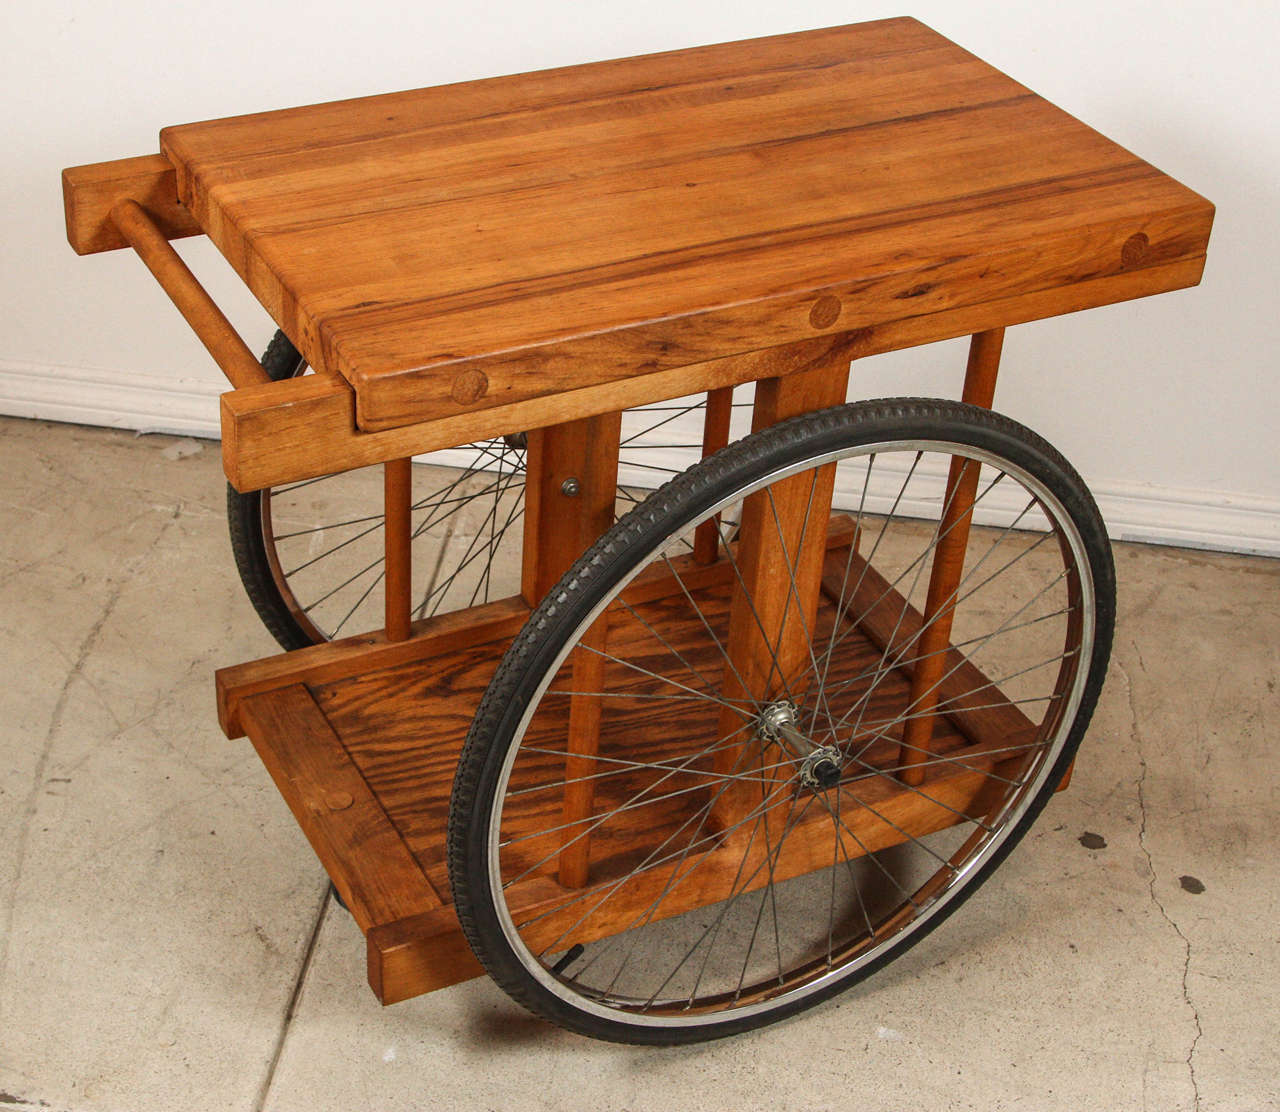 Rolling bar cart by Bill Sanders with wood and bicycle wheels, 1964.